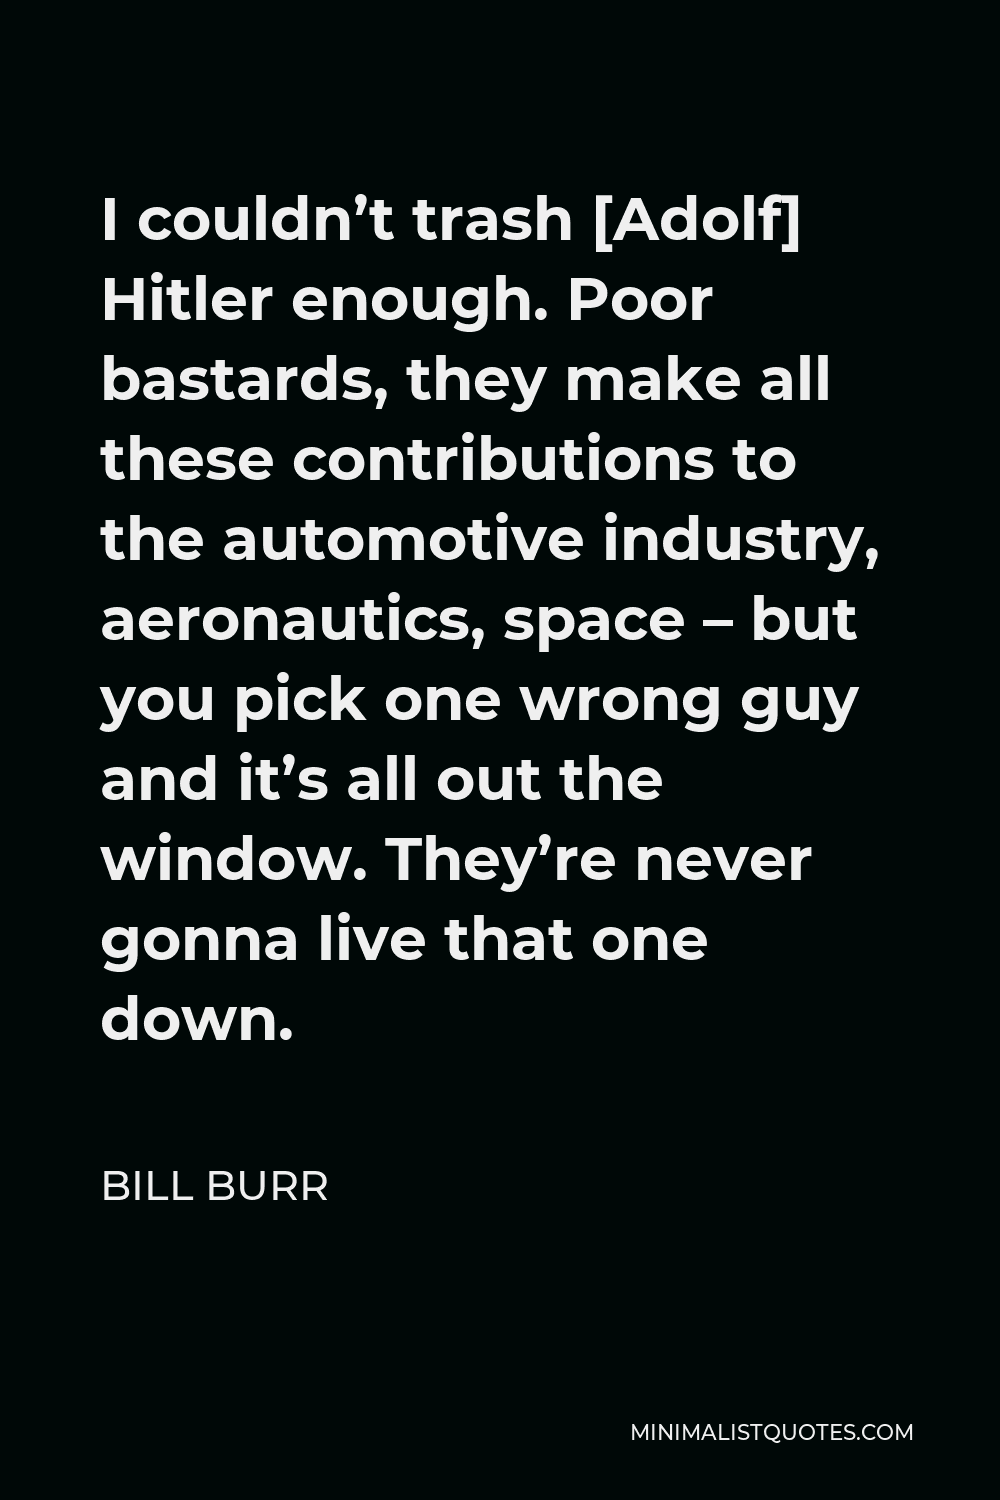 Bill Burr Quote - I couldn’t trash [Adolf] Hitler enough. Poor bastards, they make all these contributions to the automotive industry, aeronautics, space – but you pick one wrong guy and it’s all out the window. They’re never gonna live that one down.